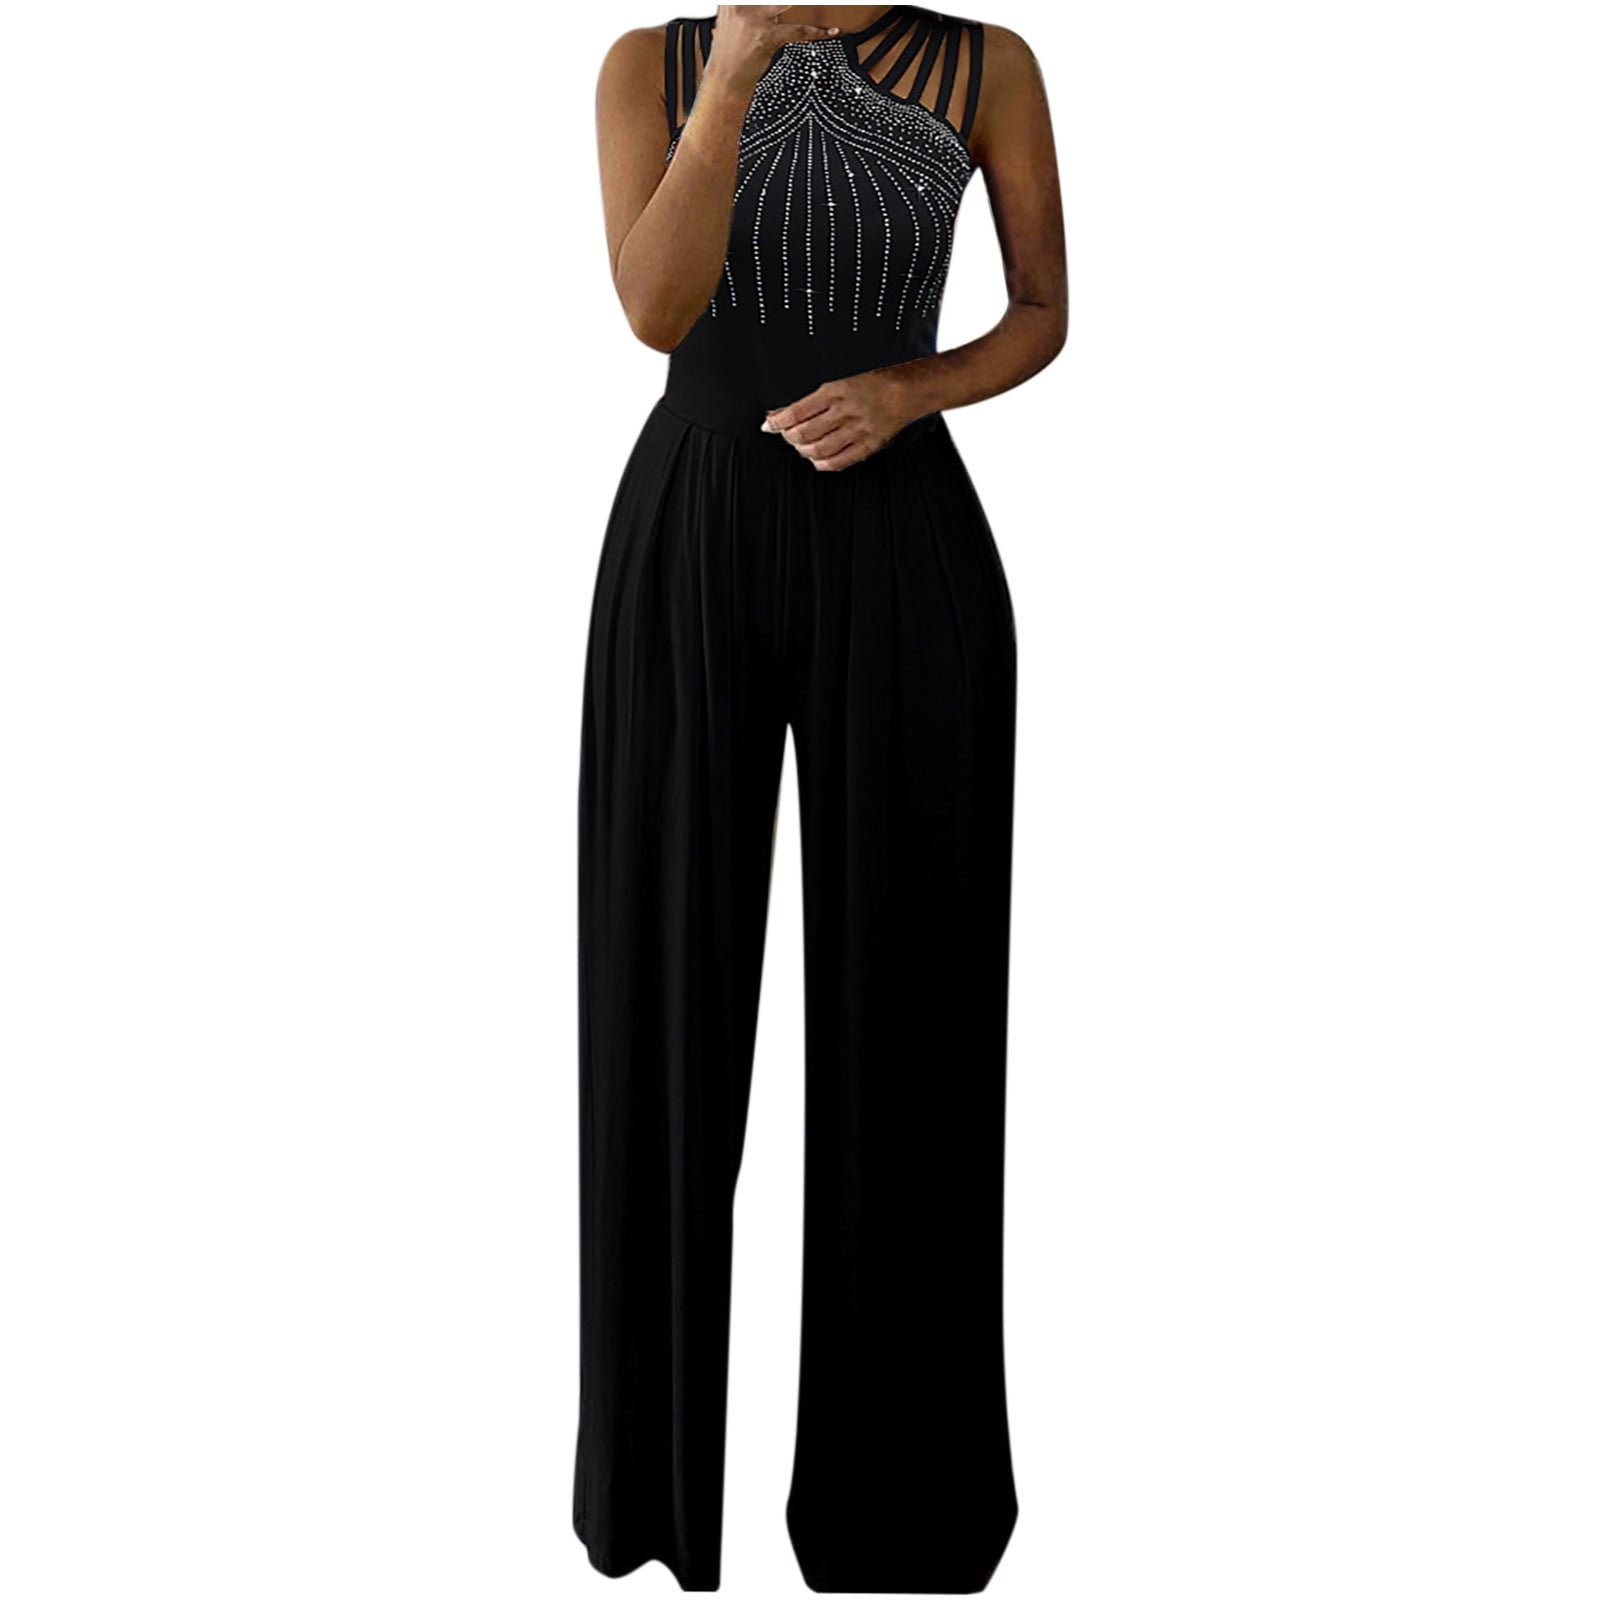 Elegant Lace Jumpsuit With Long Sleeves For Women Formal Evening Dress,  Prom Gown, And Jumpsuit Party Wear Dress From Hover8, $114.58